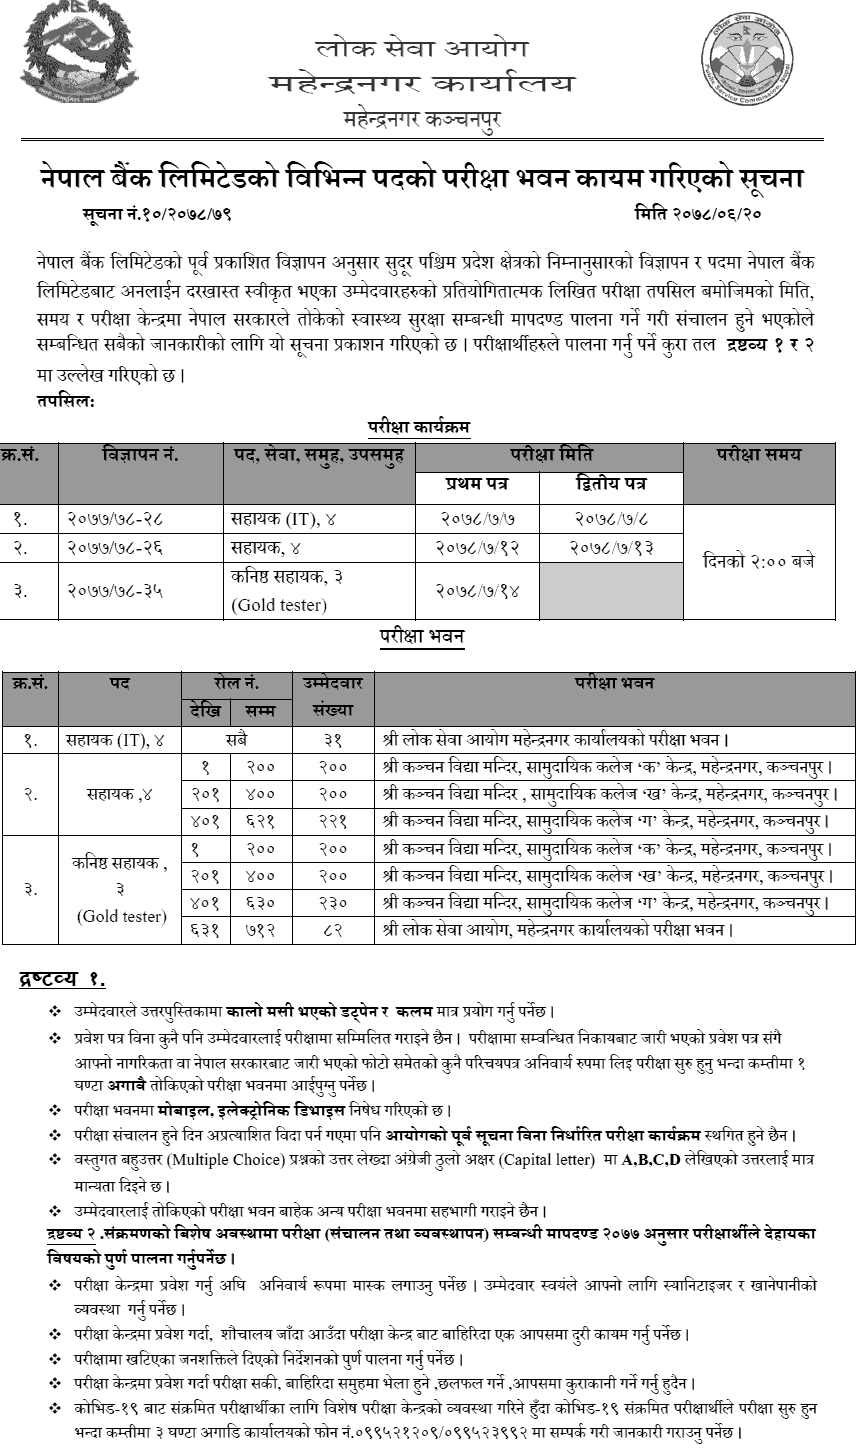 Nepal Bank Limited Written Exam Center Mahendranagar Assistant (4th) and Gold Tester (3rd) Level